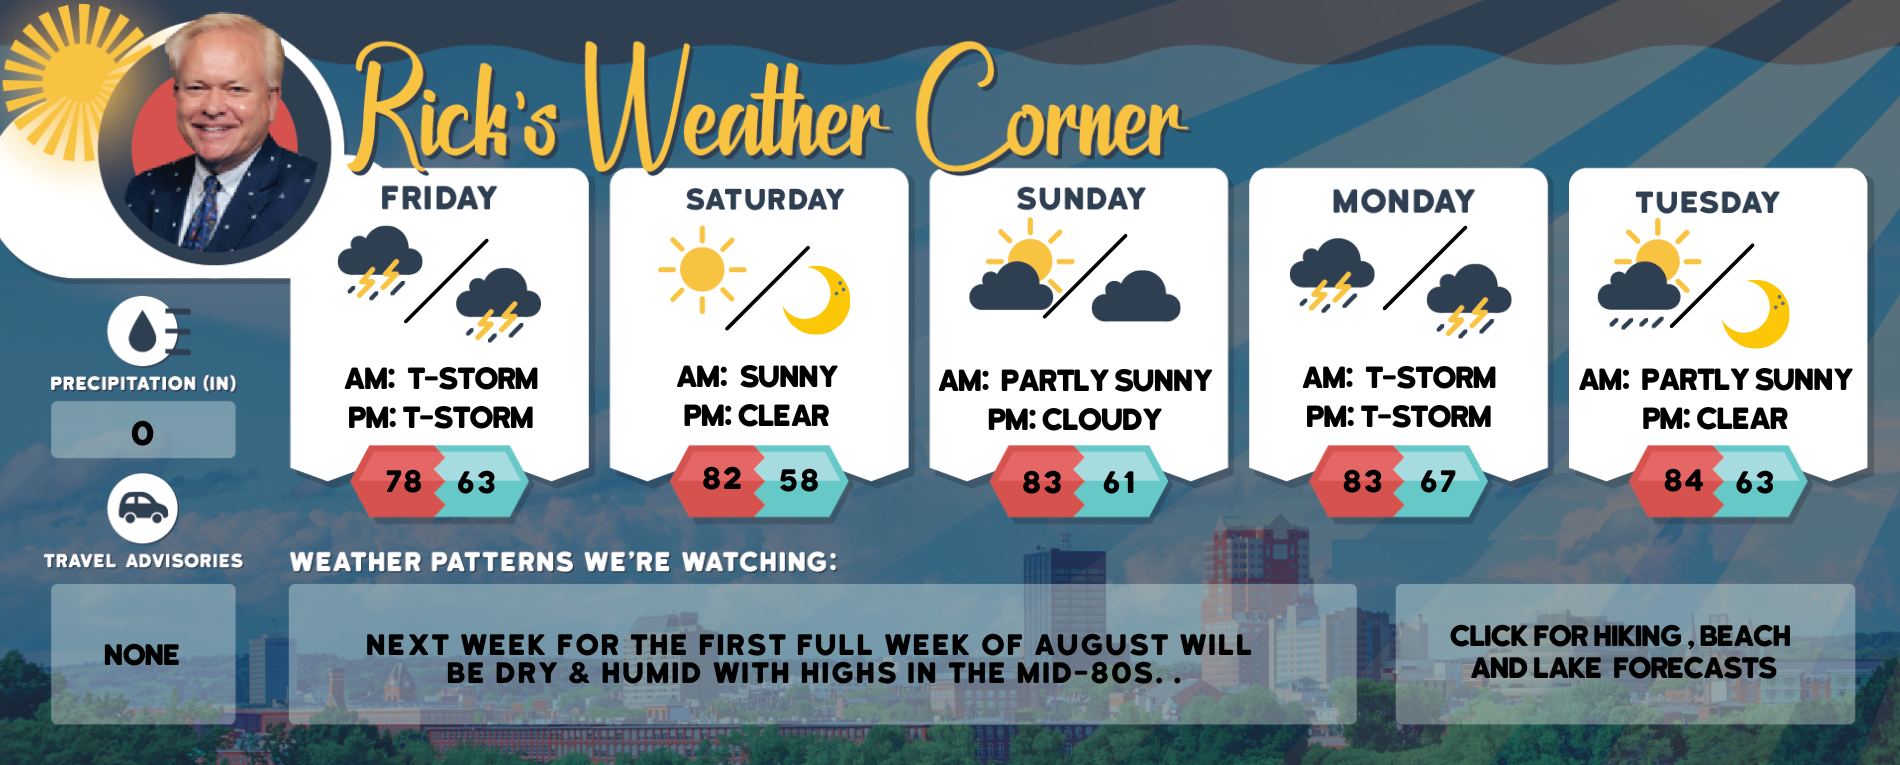 weather graphic 2 2